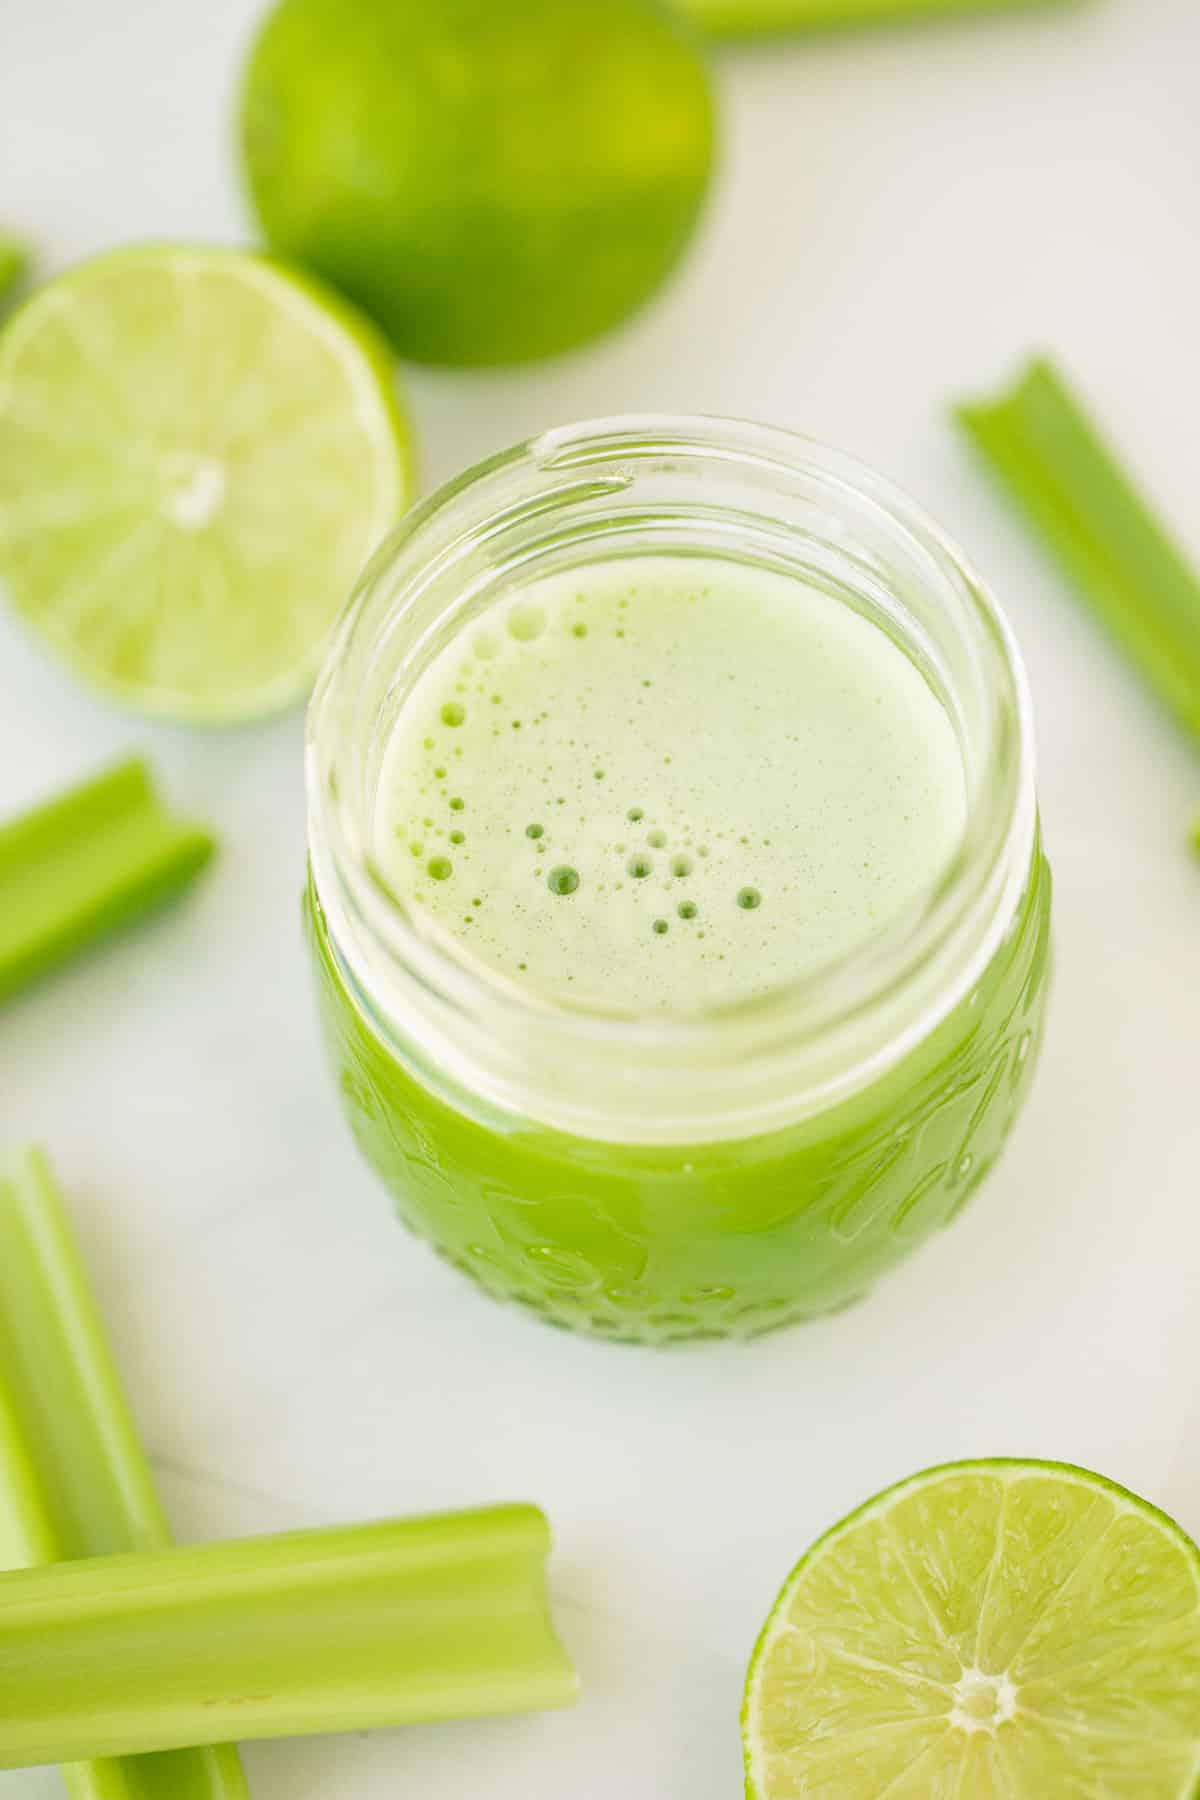 celery juice in a serving glass with white foam on top